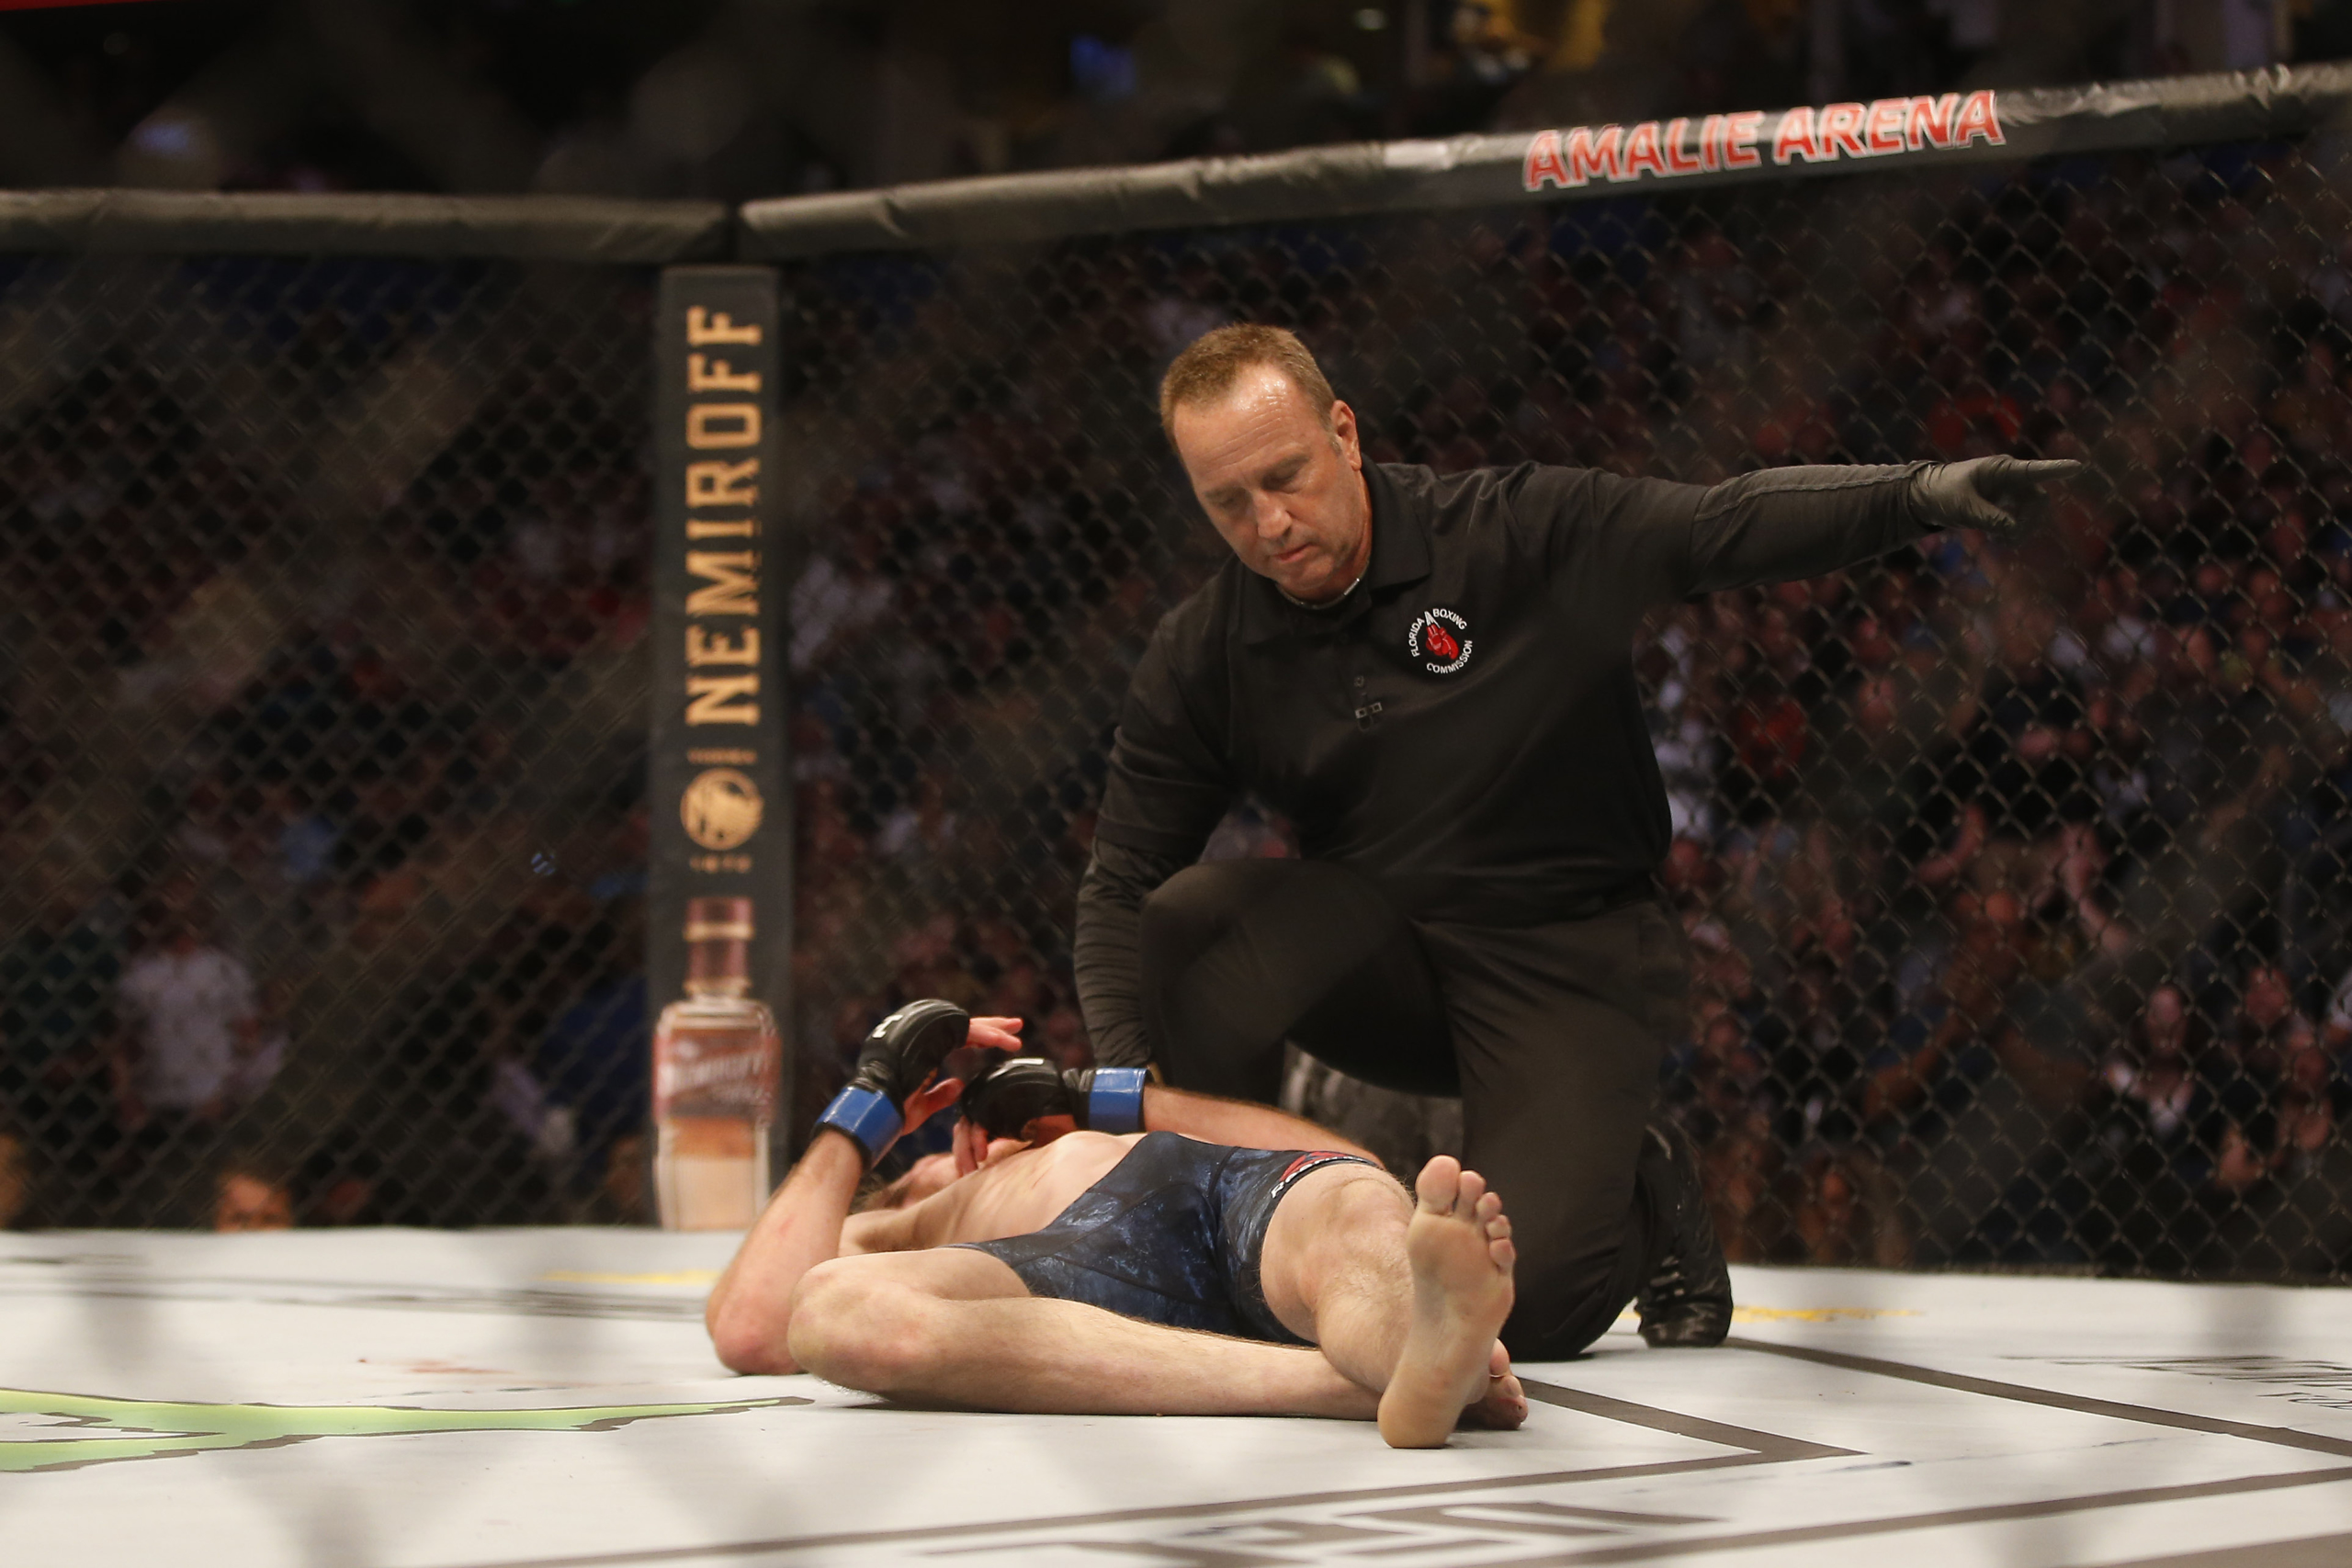 UFC Deaths: Taking a look into the dark side of cage fighting